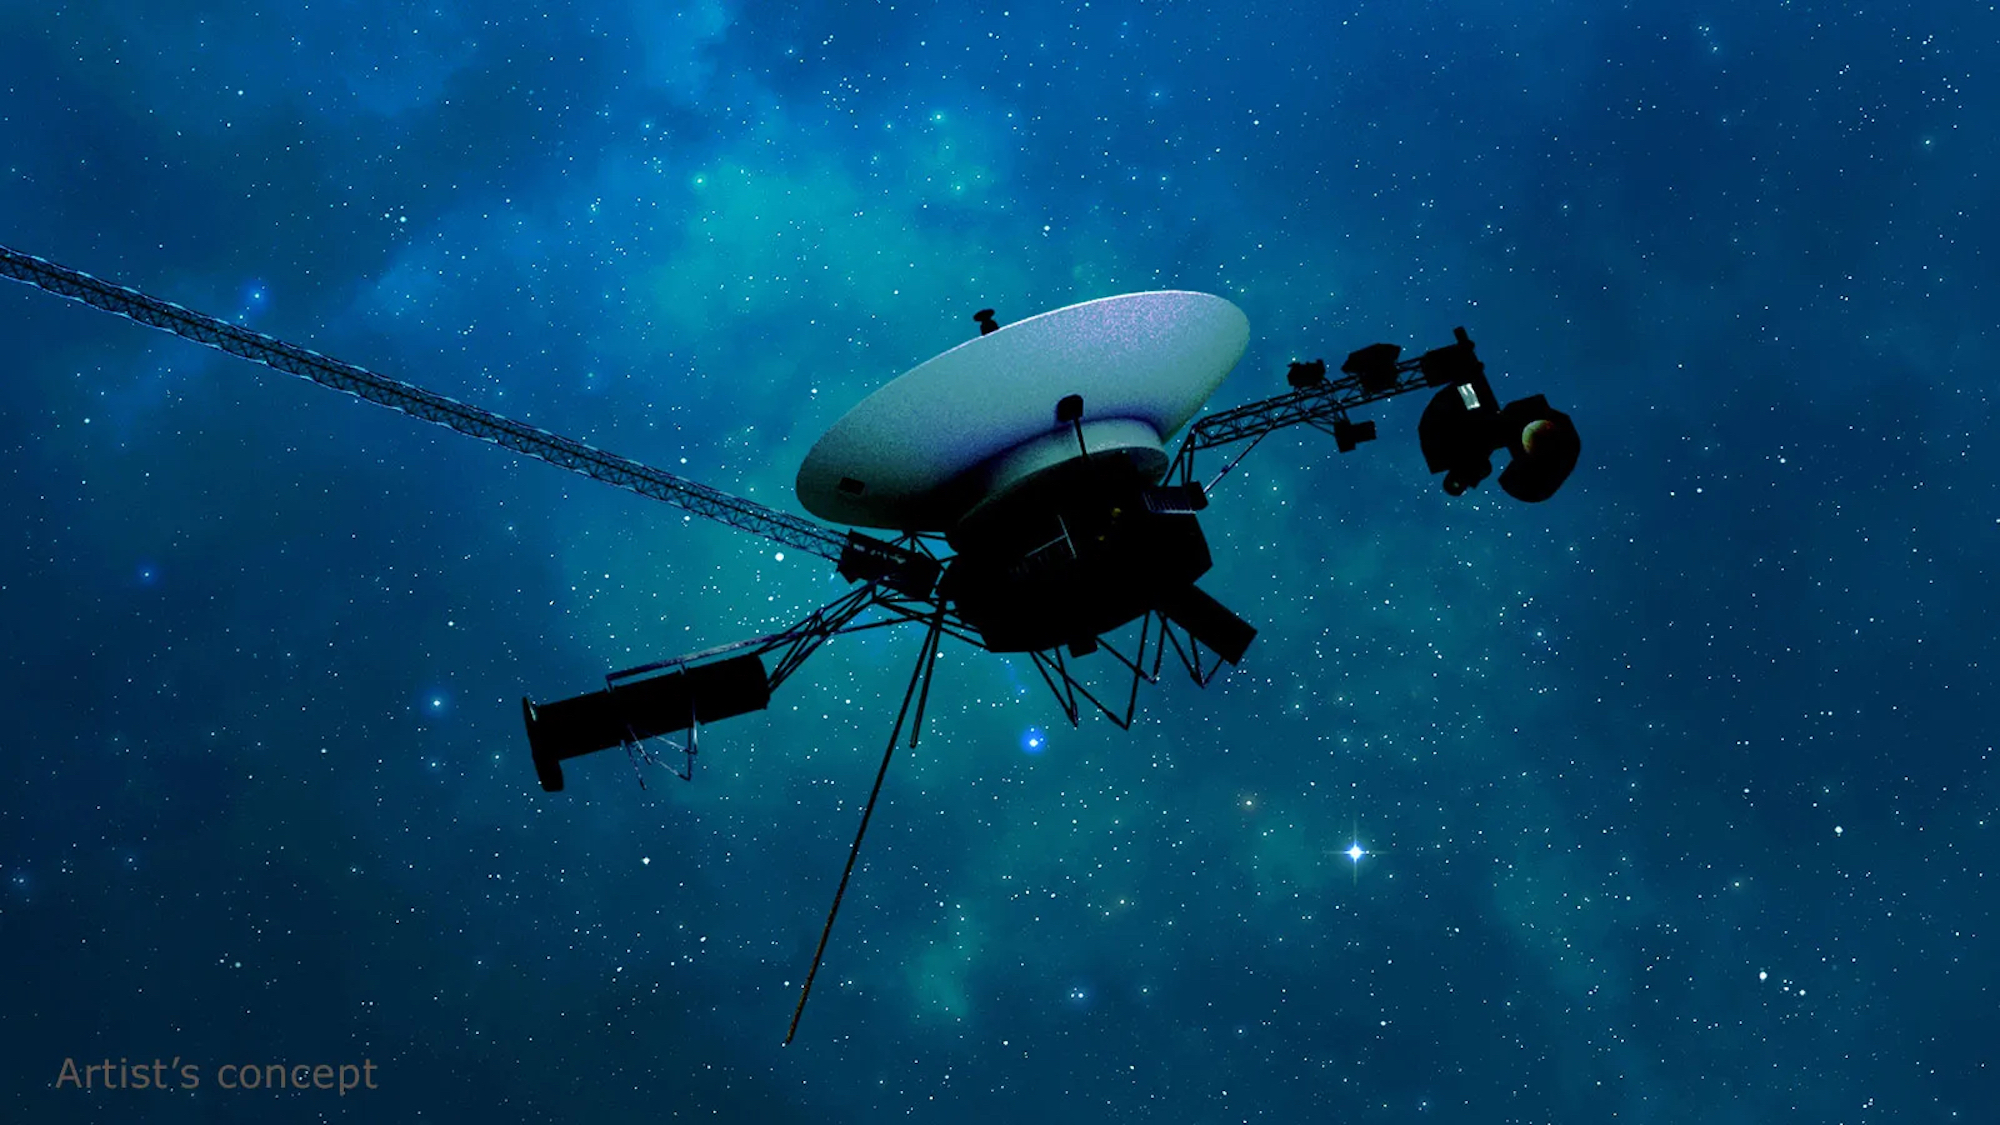 Voyager probes get virtual tune-up to keep decades-long missions going and going